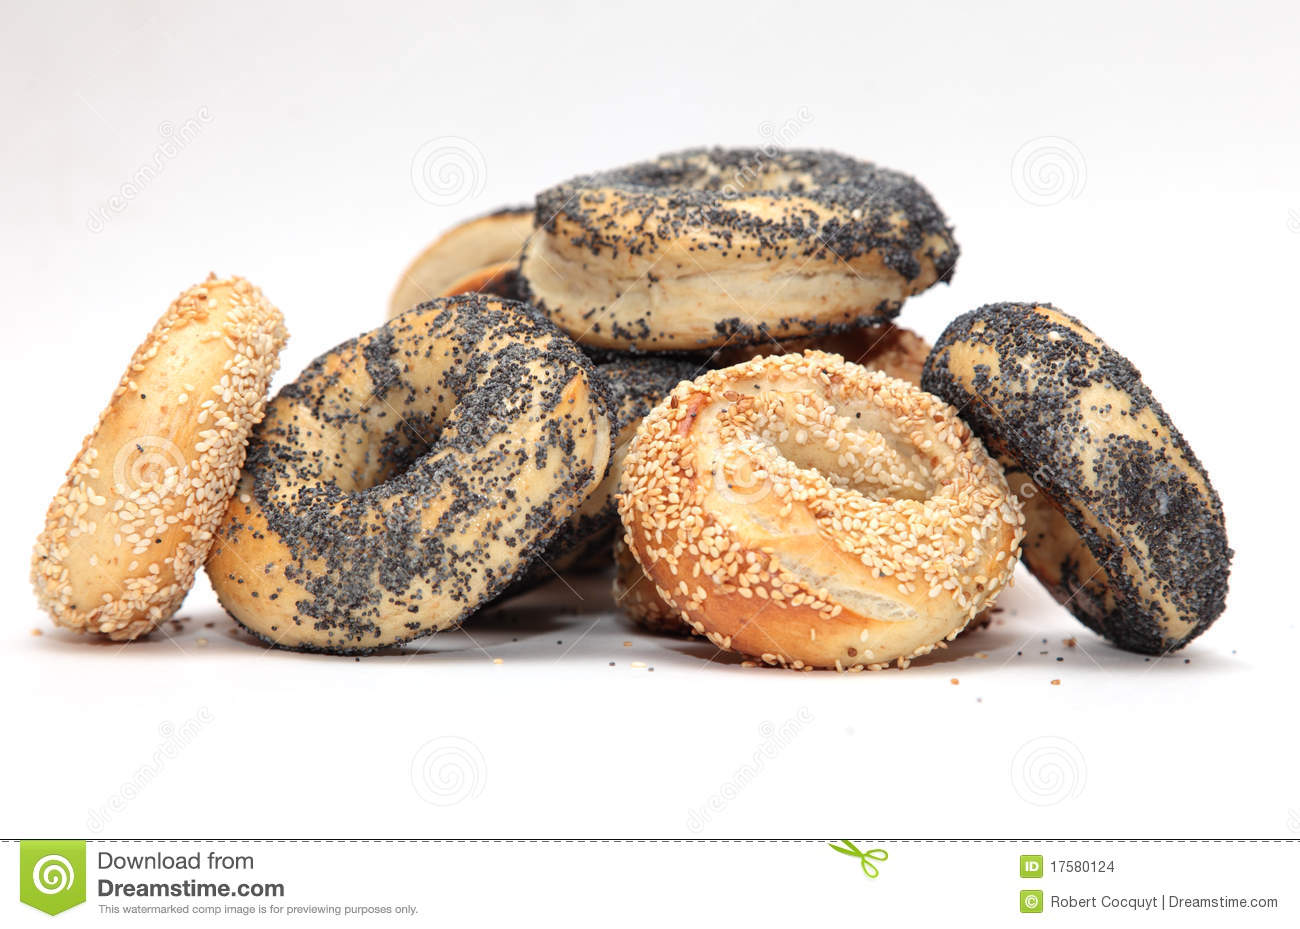 Bagel Is A Bread Product Traditionally Shaped By Hand Into The Form